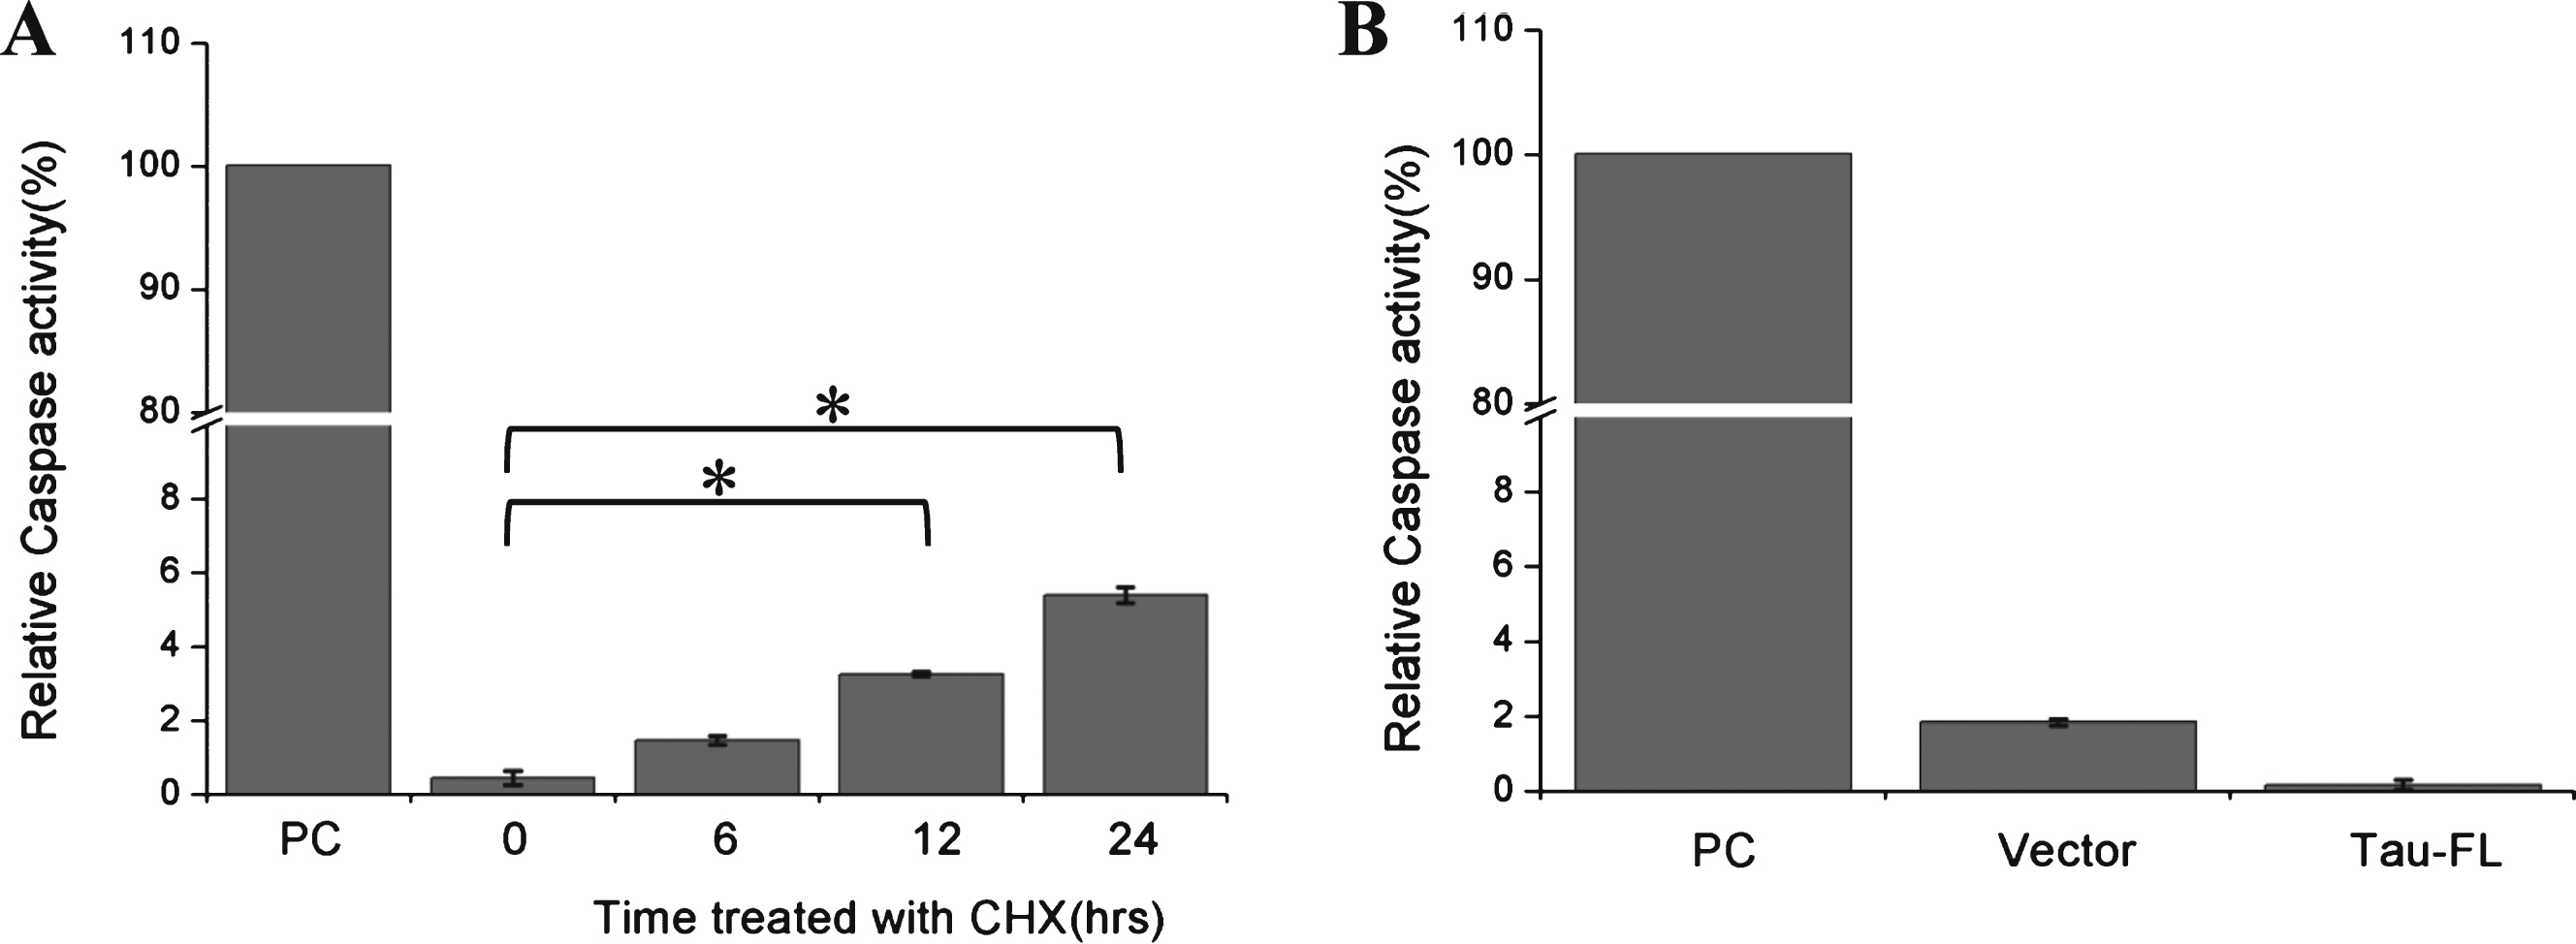 Cycloheximide induces activation of caspase in Kc cells. A) Caspase activity were assayed when Kc cells were treated with cycloheximide (100 μg/ml) for the indicated times, recombinant caspase-3 was used as the positive control (n = 3, *p <  0.05). B) Caspase activity were assayed in Kc cells overexpressing full-length htau (2N4R) for 24 h, recombinant caspase-3 was used as the positive control (n = 3).